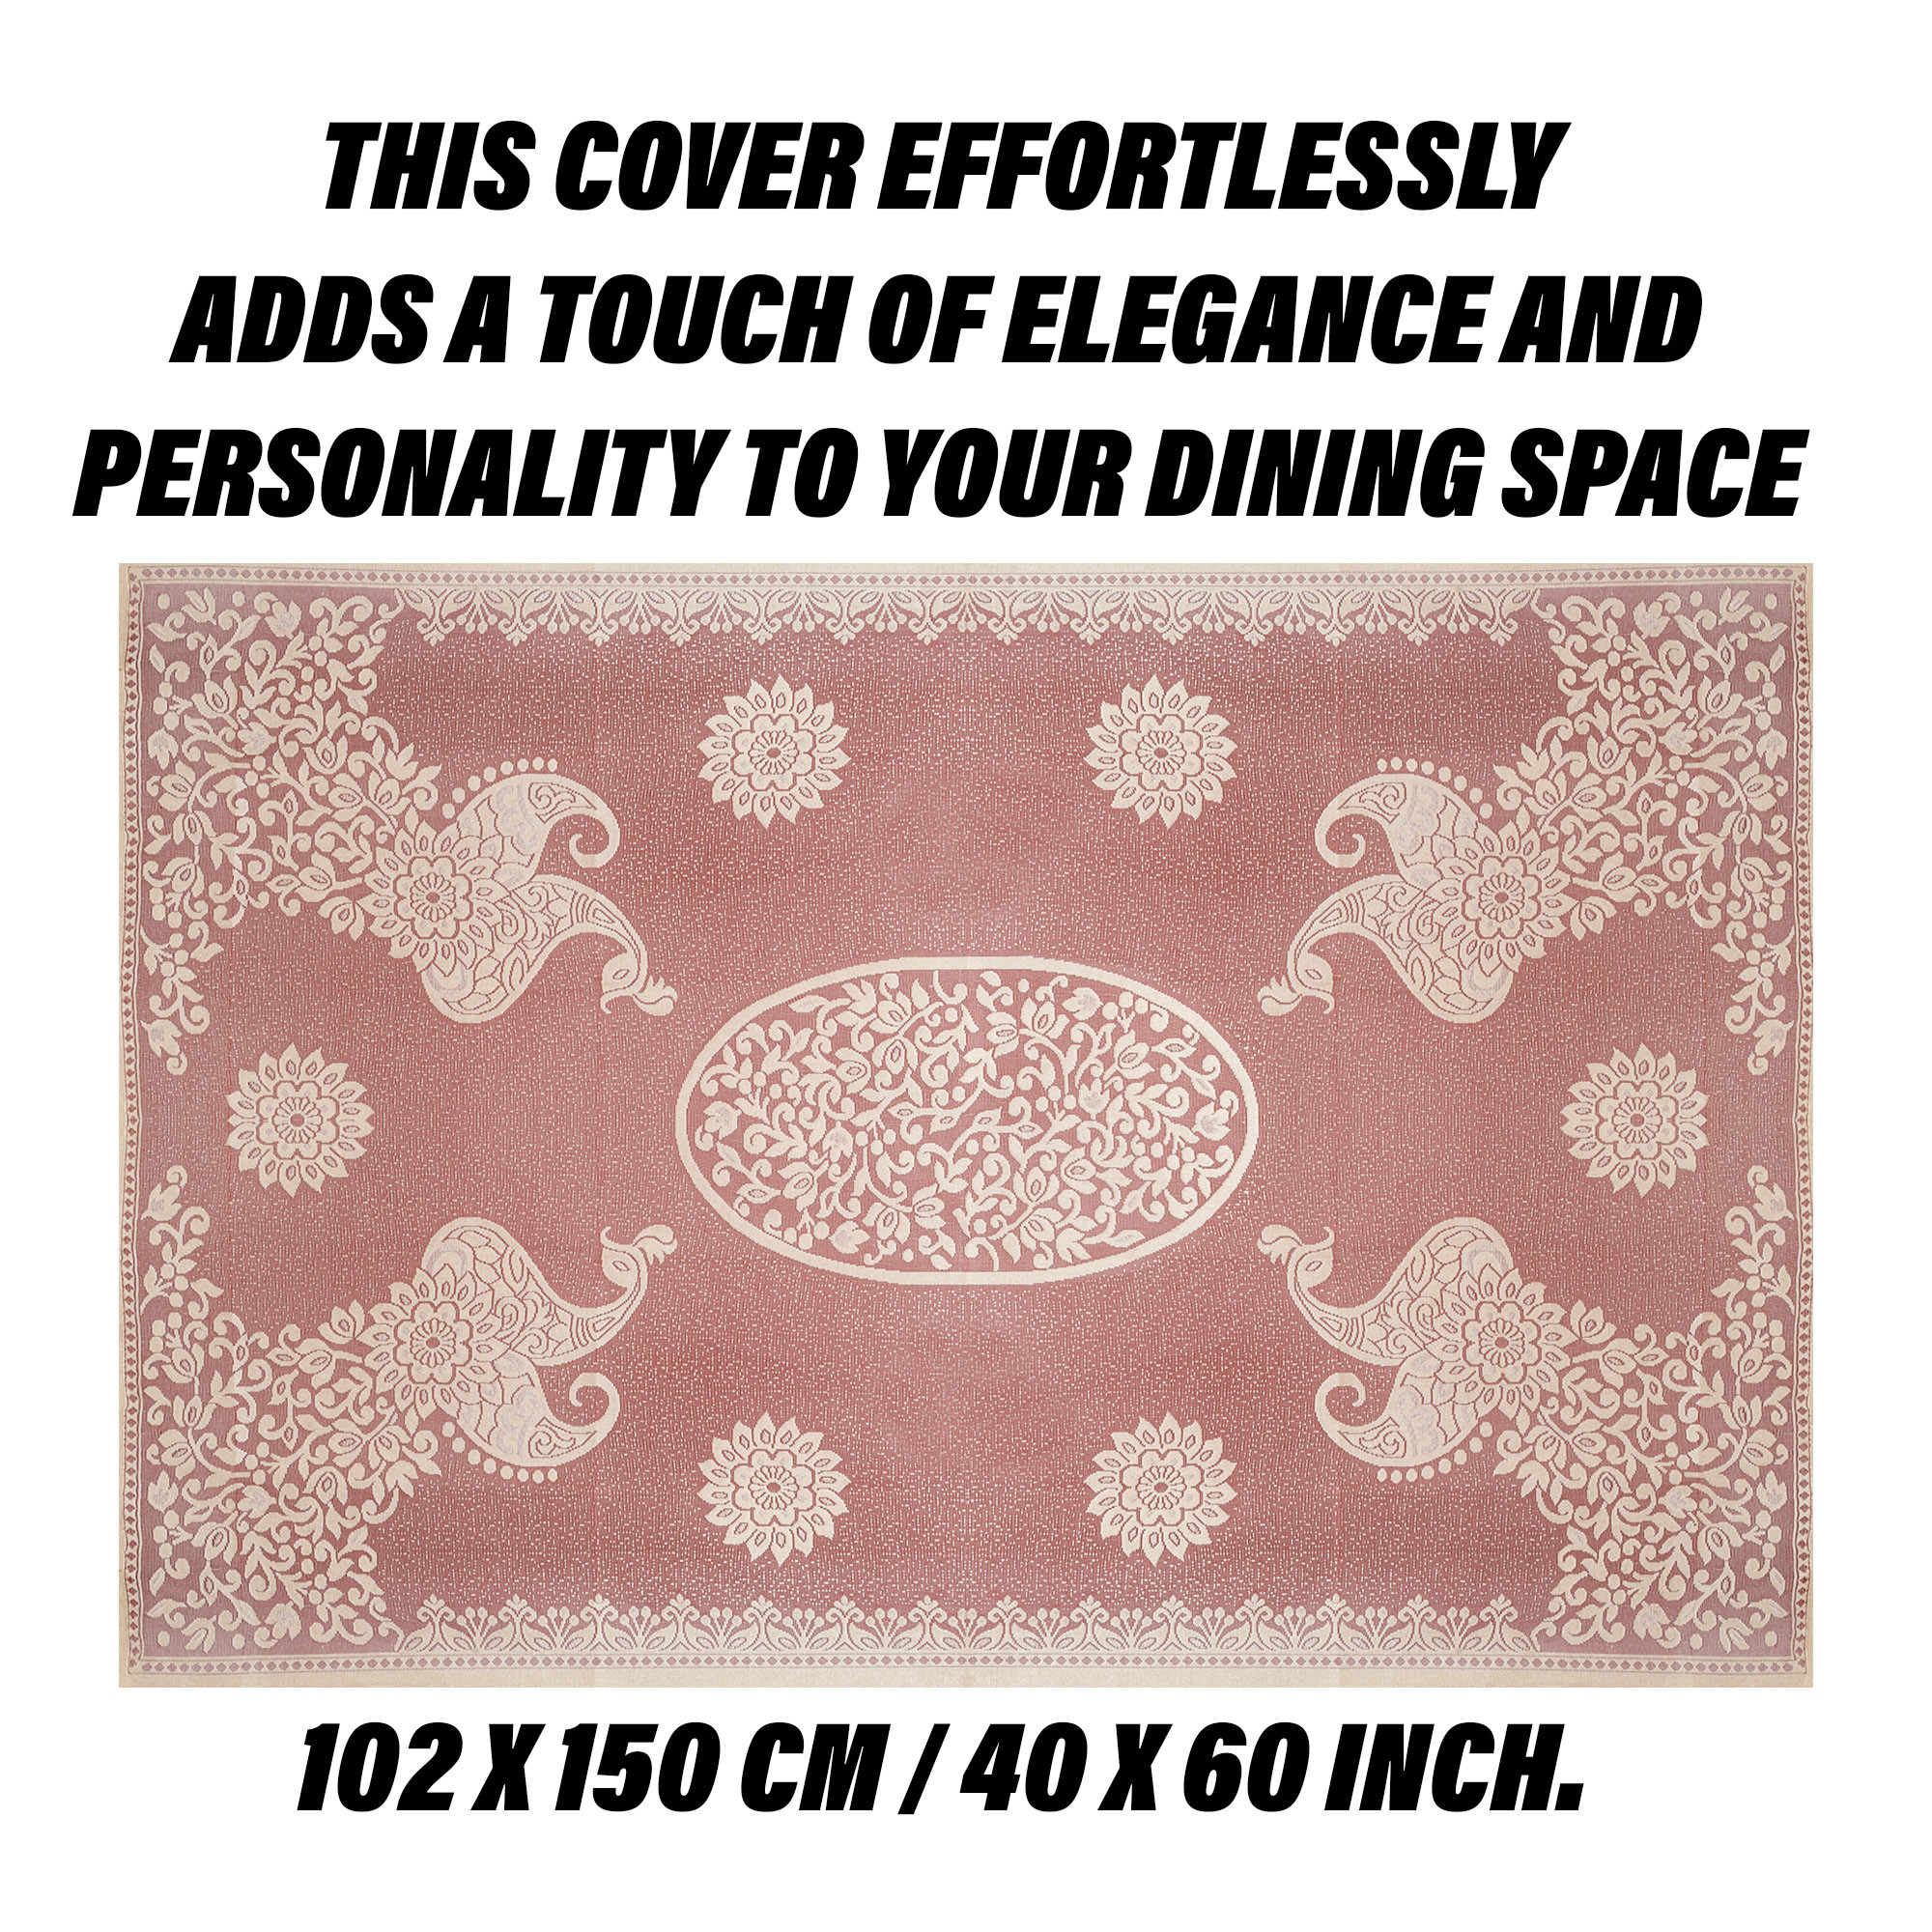 Kuber Industries Center Table Cover | 4-Seater Table Cover | Net Tabletop Cover | Kitchen Table Cloth | Table Protector Cover | Peacock-Design | 40x60 Inch | CTC | Maroon